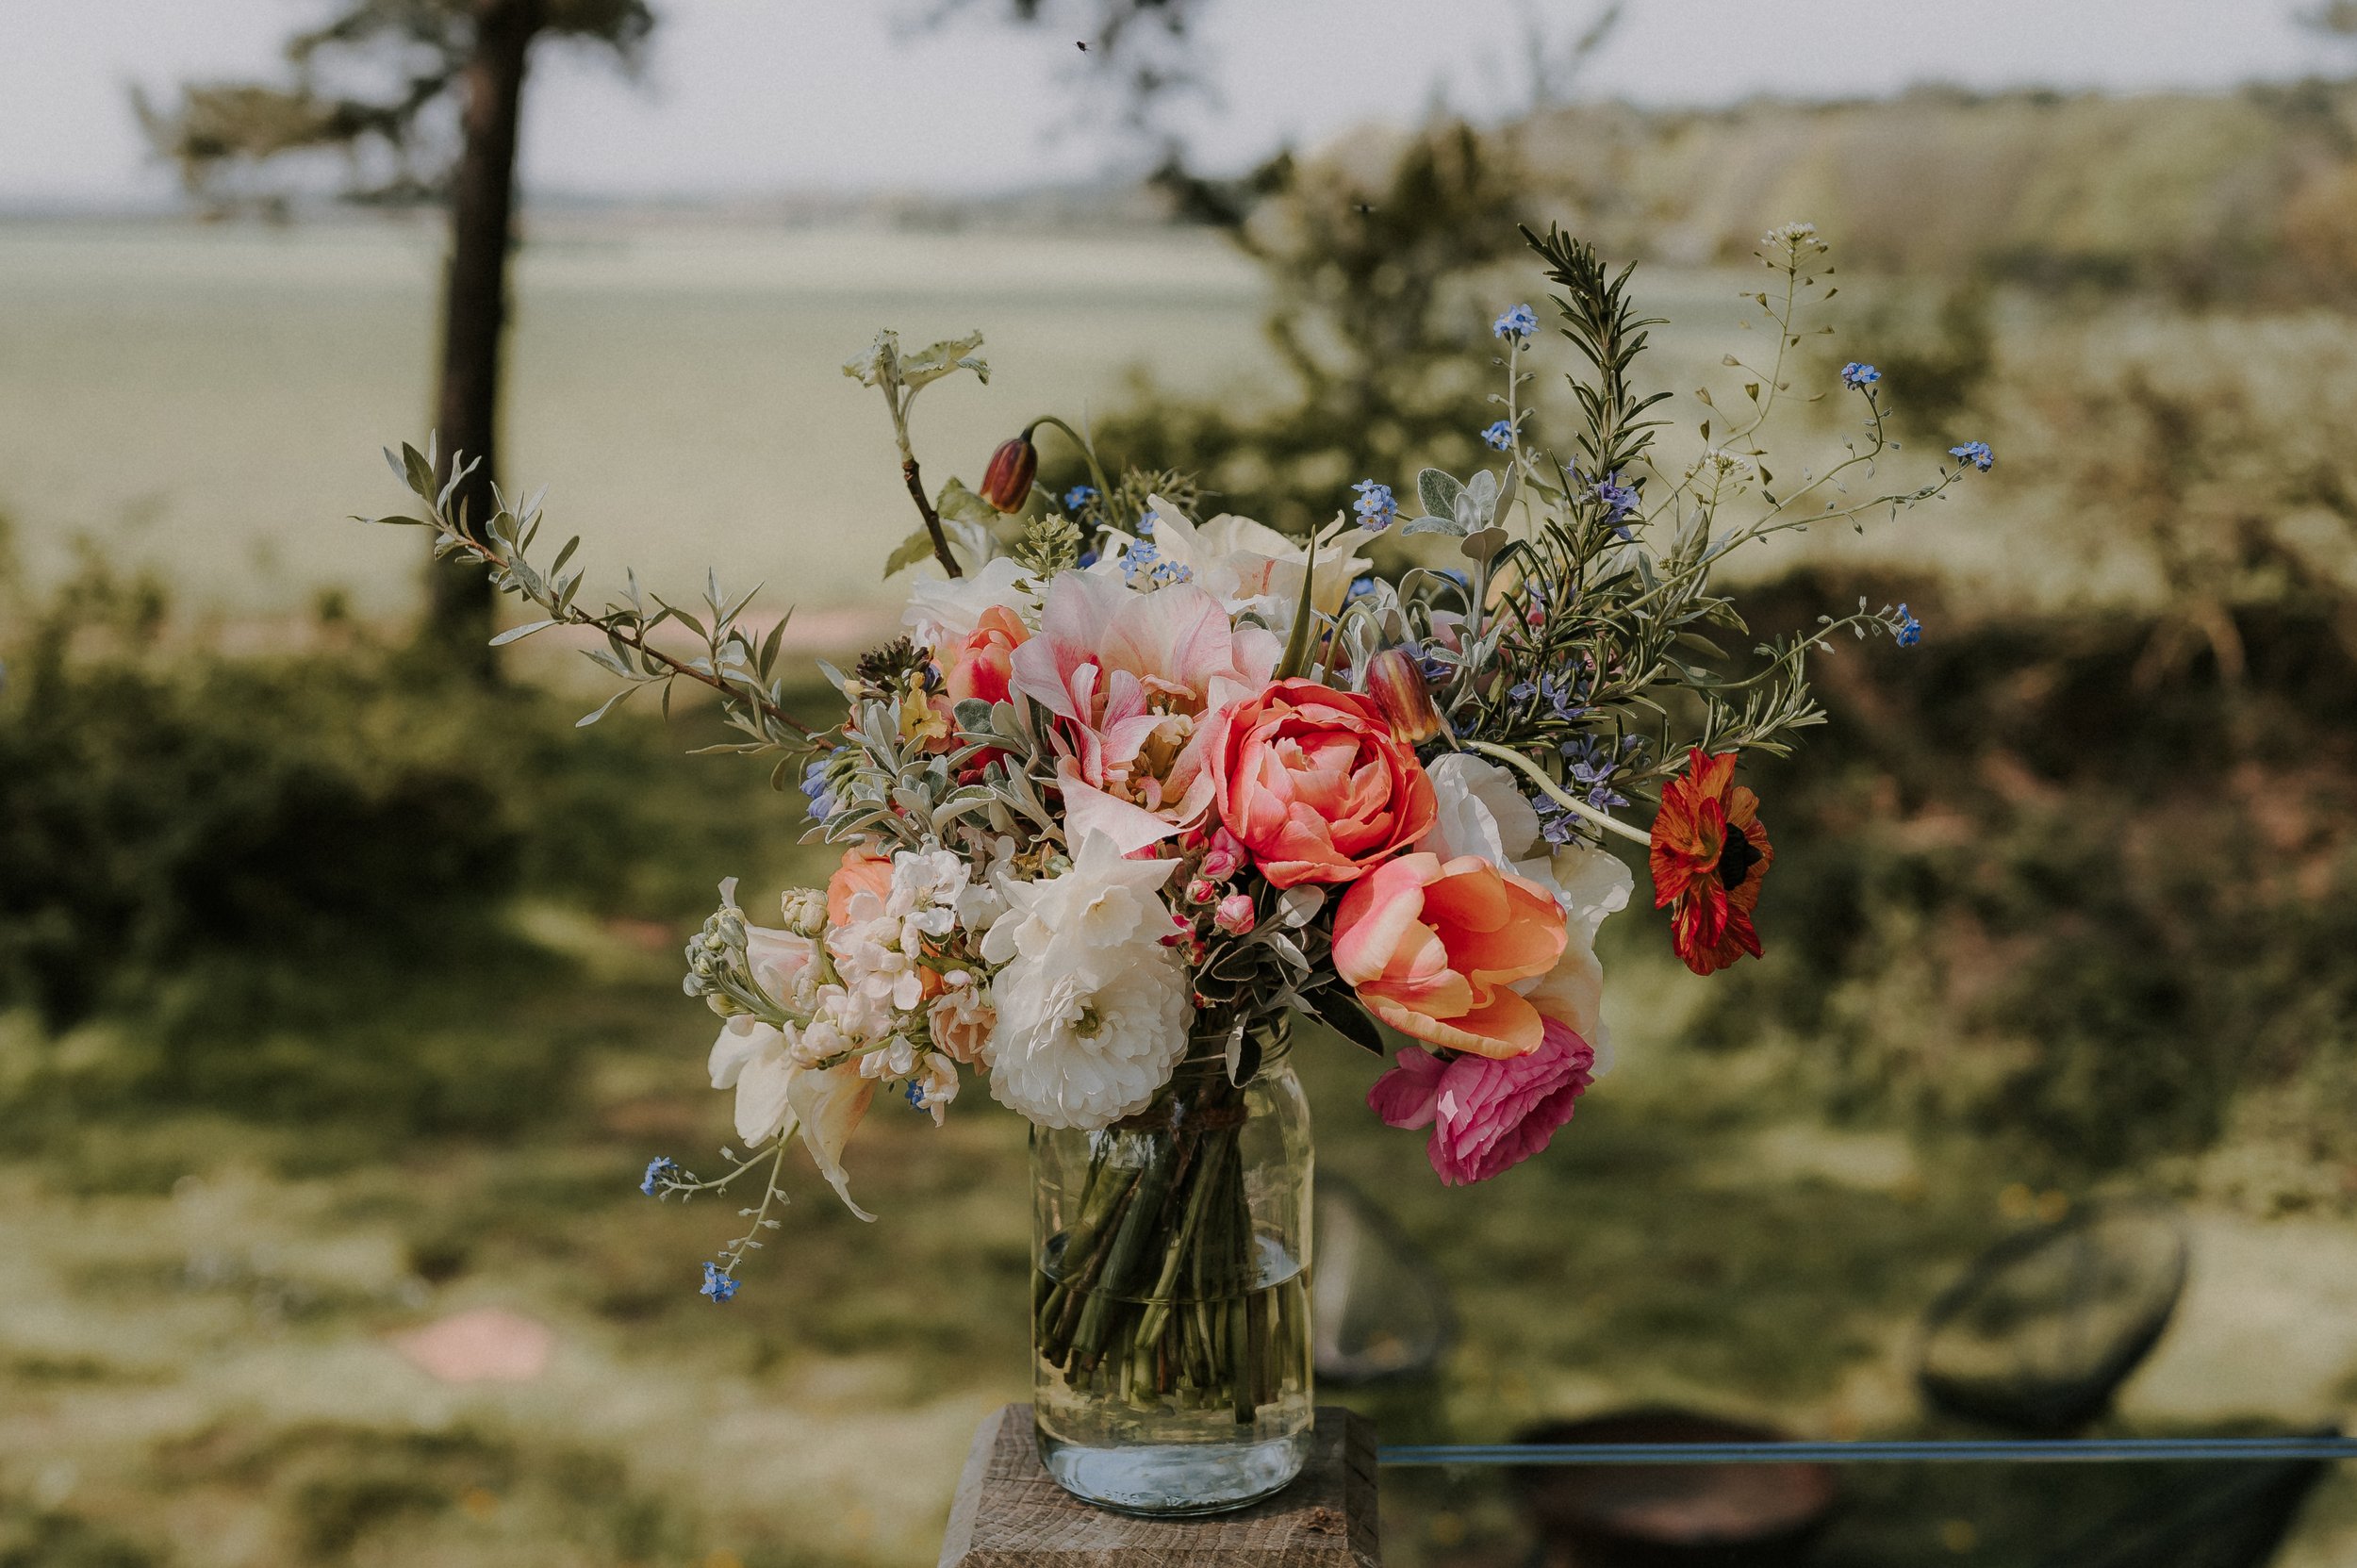 A Stunning, Locally Grown April Wedding Bouquet by The Wildfolk Florist